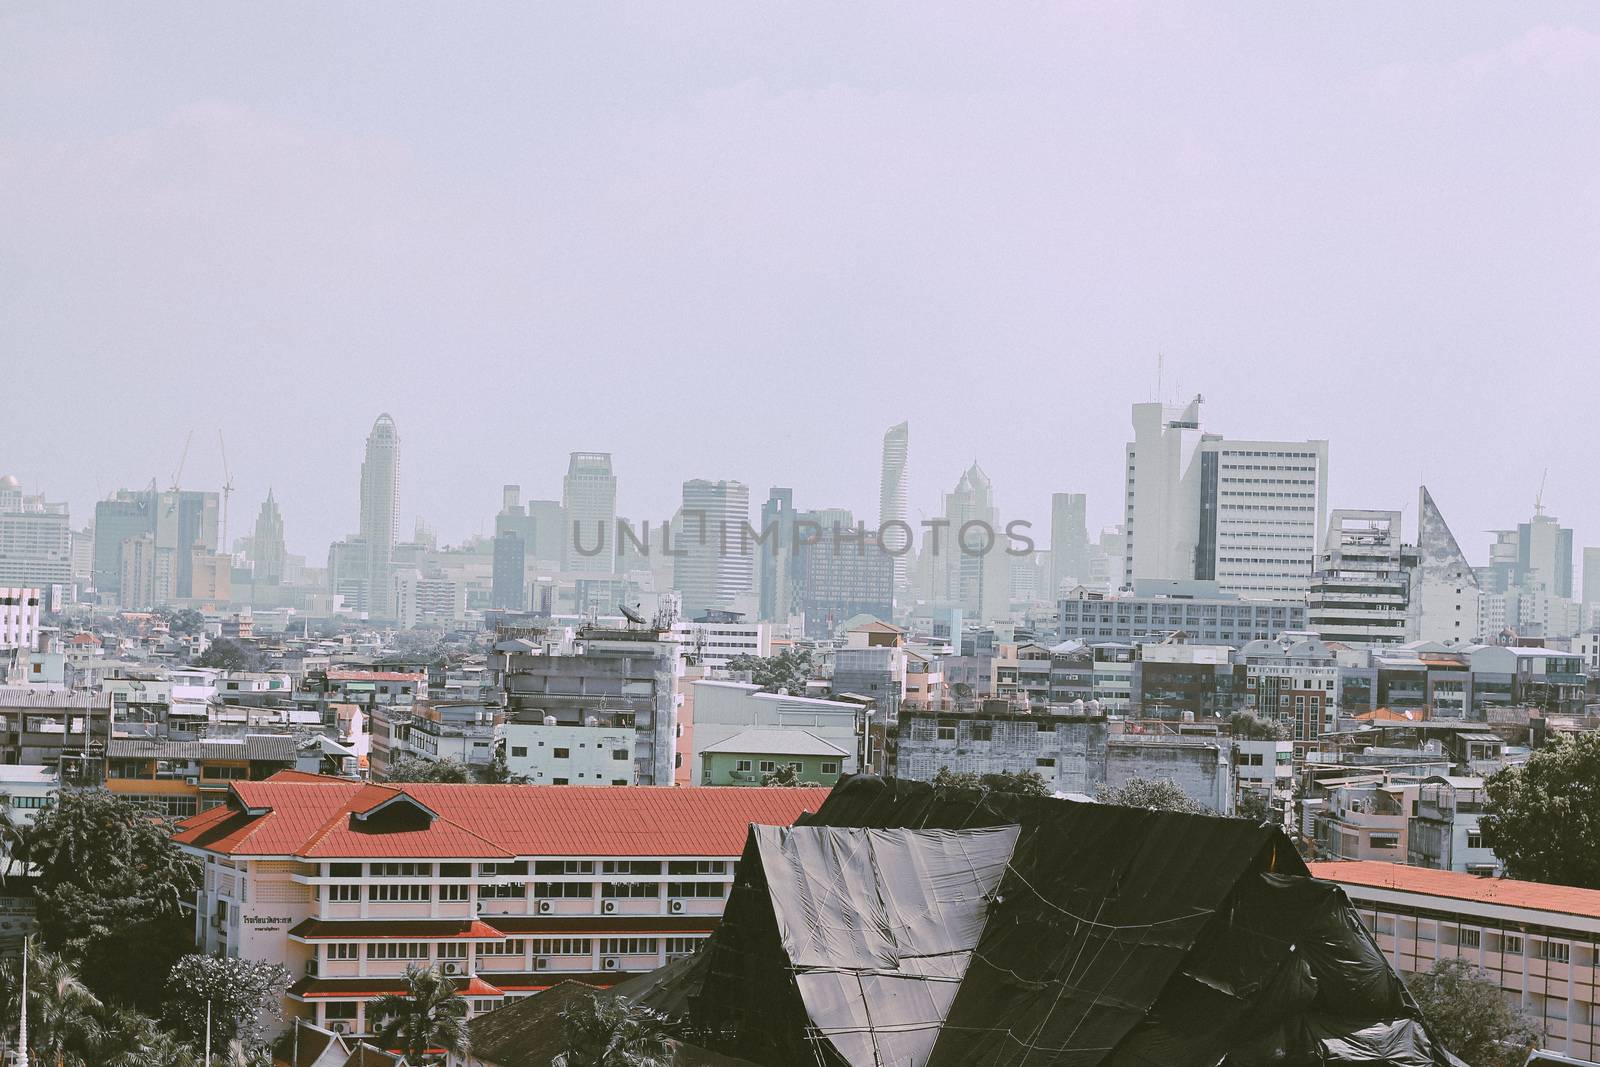 Crowded skyline of Bangkok, Thailand covered in smog showing the severity of air pollution in the city